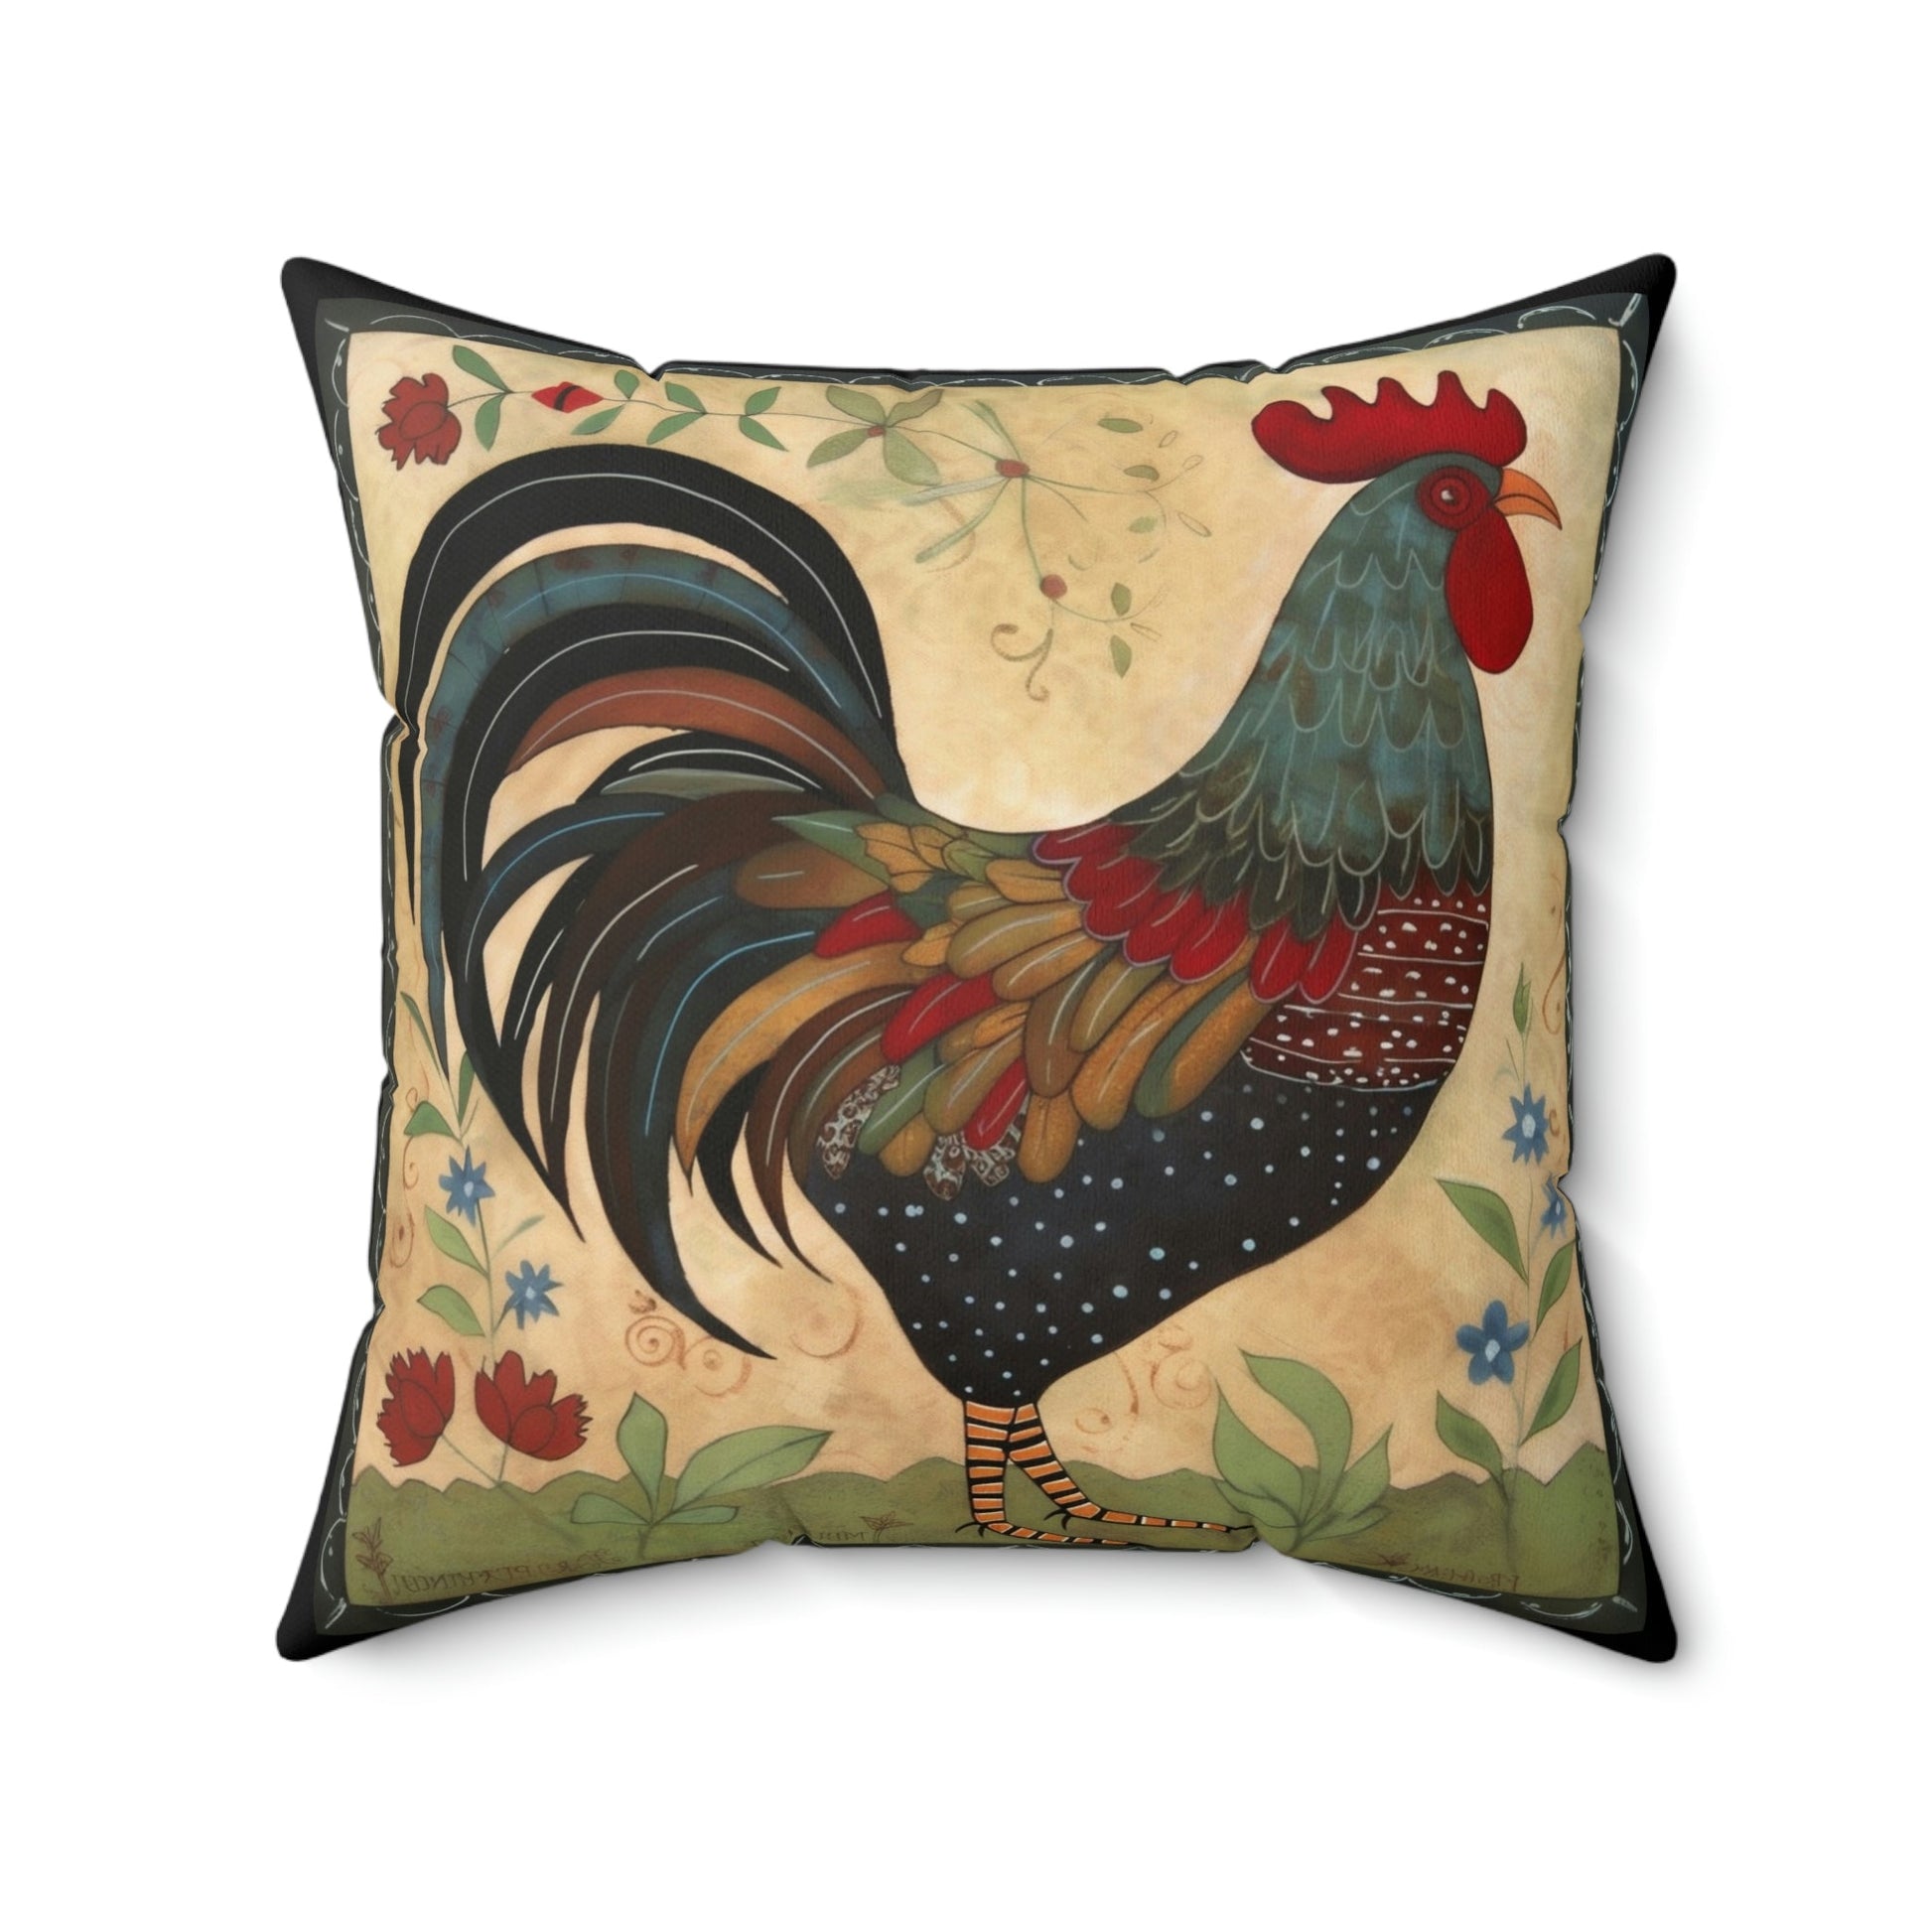 Rustic Folk Art Rooster Design Square Pillow - Cottagecore Country Farm Style Gift for Yourself or Loved Ones